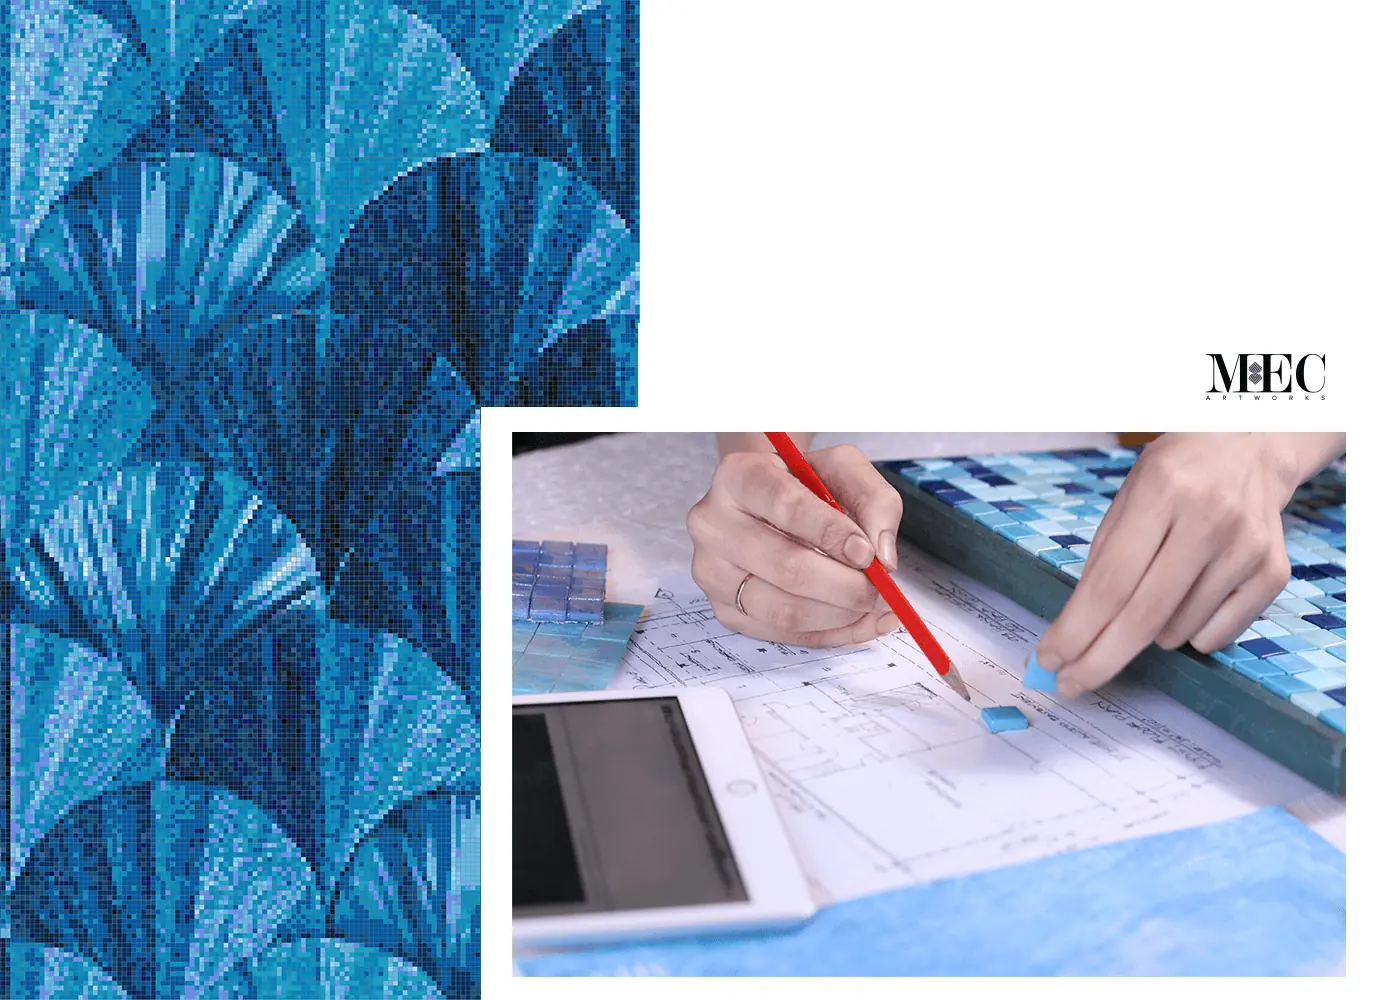 a collage showing a fishscale blue abstract pool mosaic design and manual design adjustment